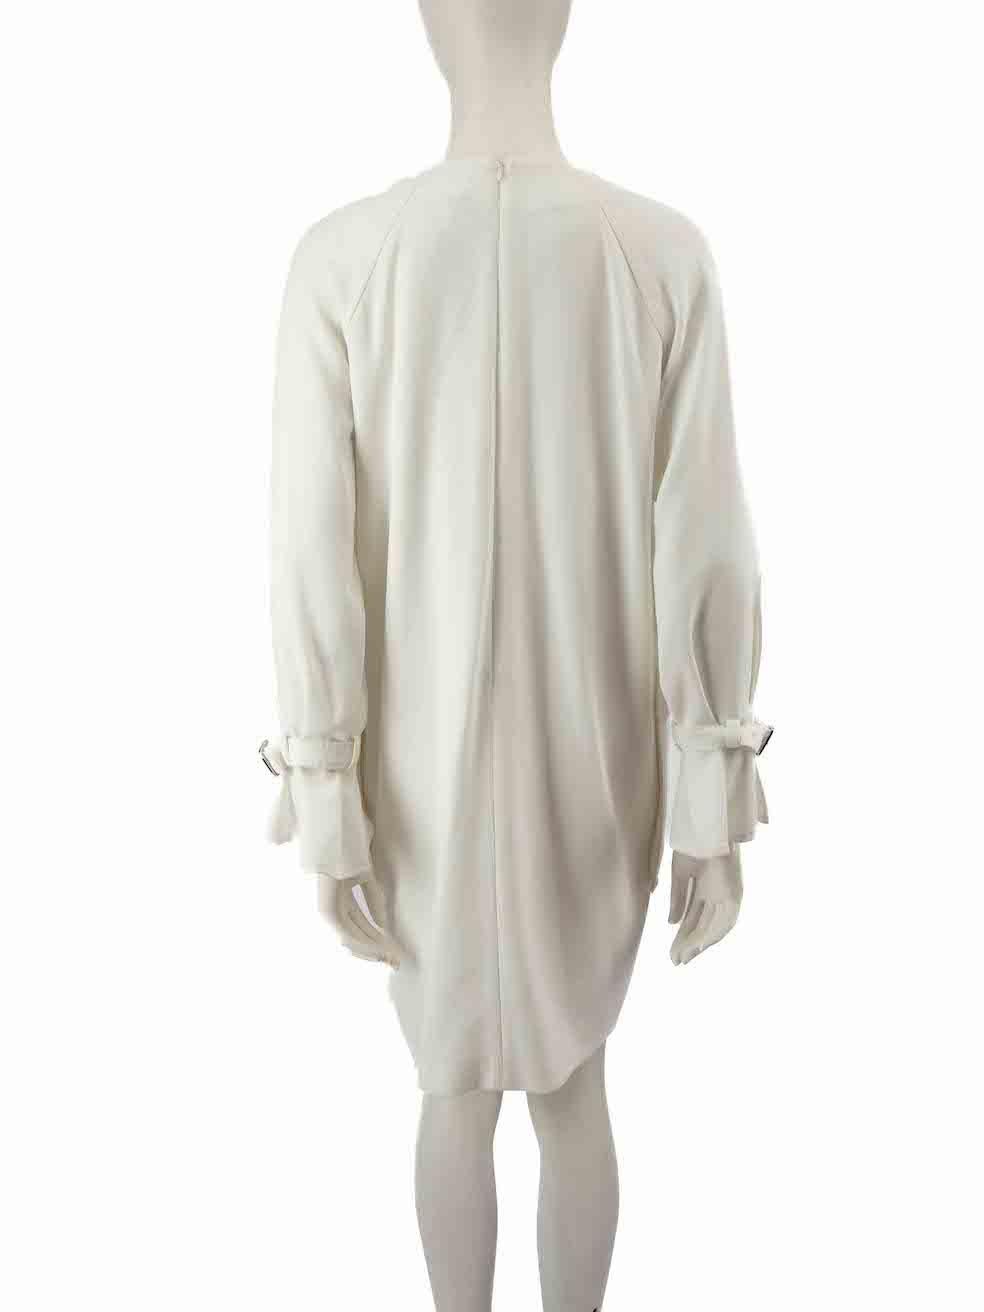 Max Mara White Gathered Neckline Dress Size M In Good Condition For Sale In London, GB